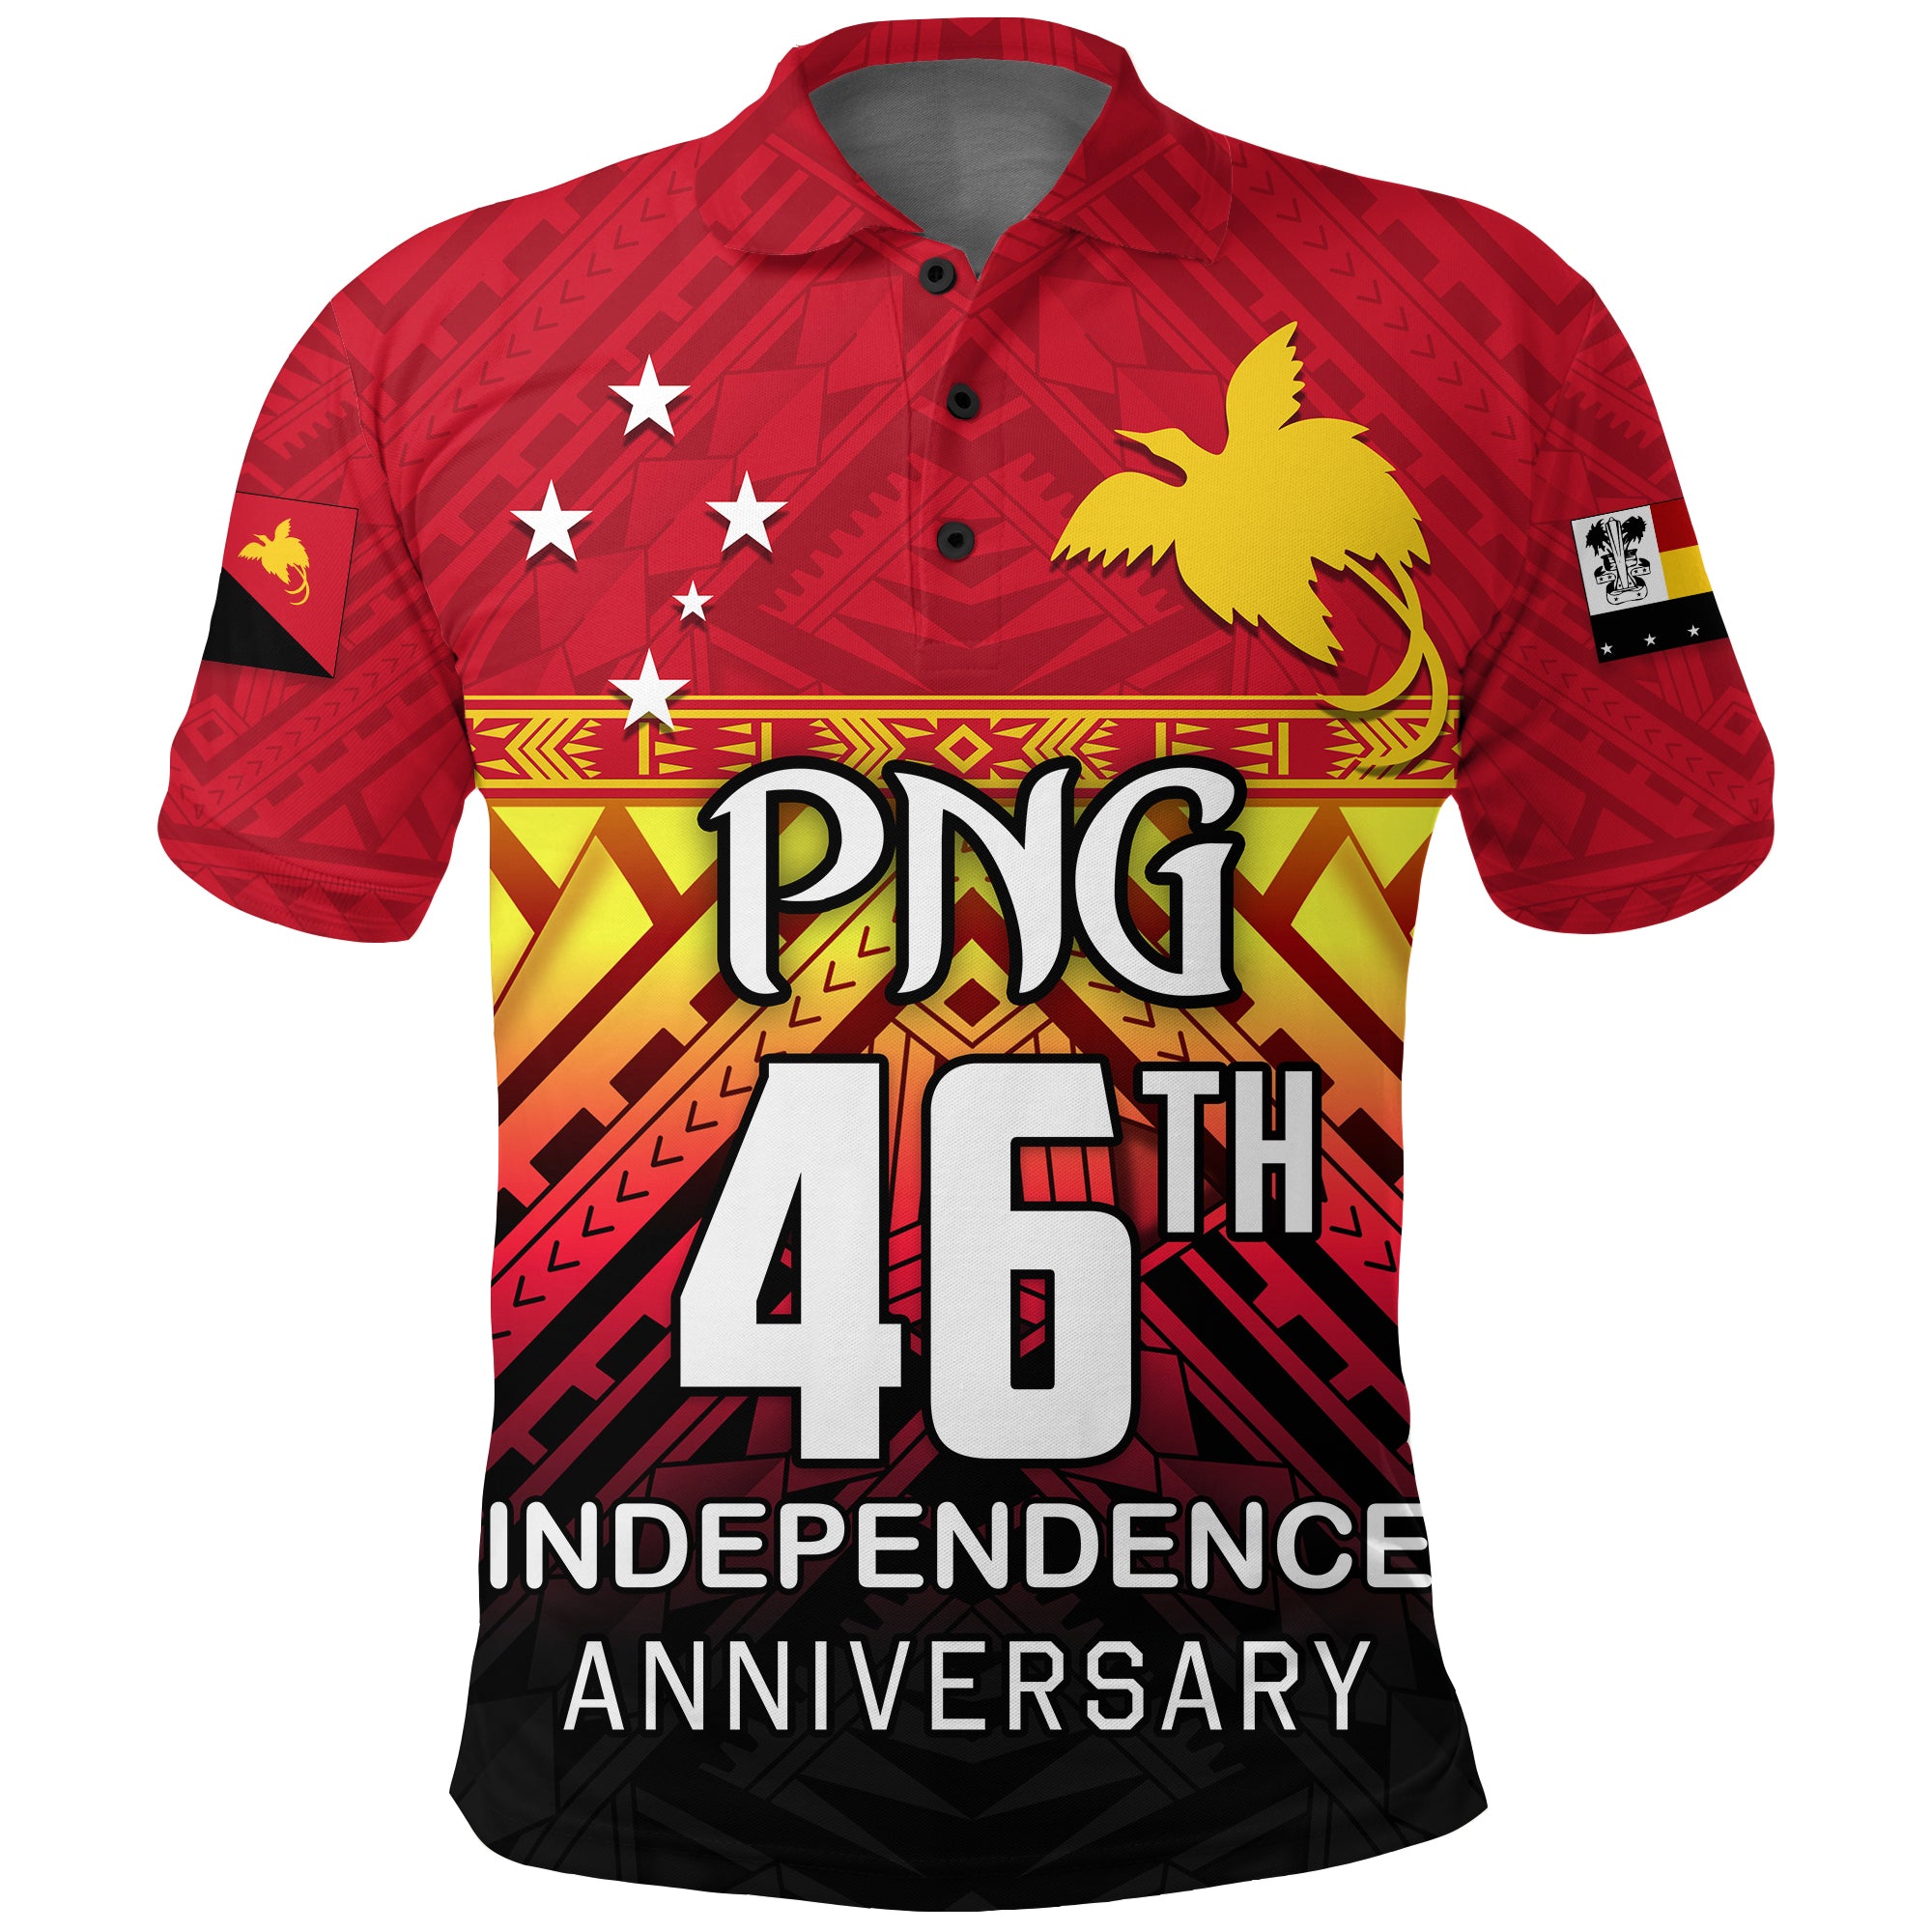 (Phyllostachys) Papua New Guinea 46th Independence Anniversary Polo Shirt LT4 Unisex Red - Polynesian Pride